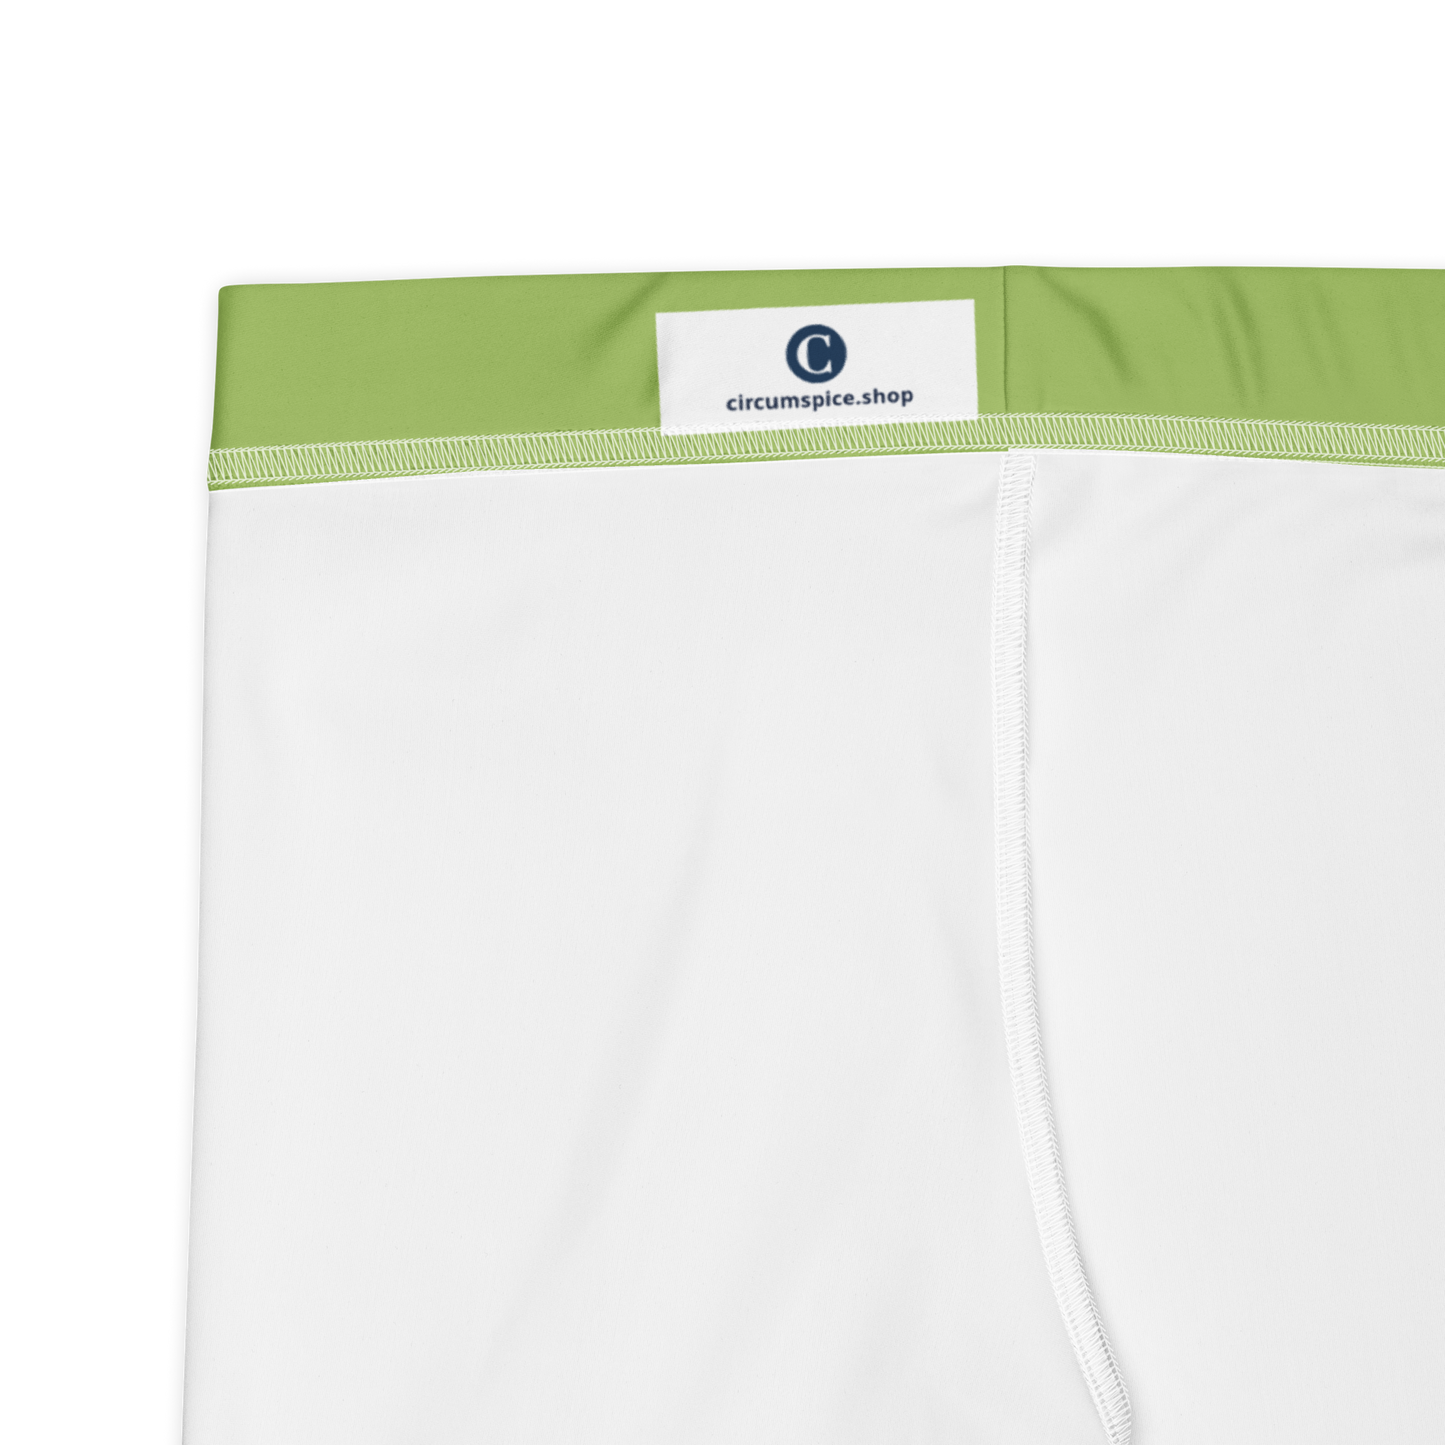 Michigan Upper Peninsula Tight Shorts (w/ UP Outline) | Gooseberry Green